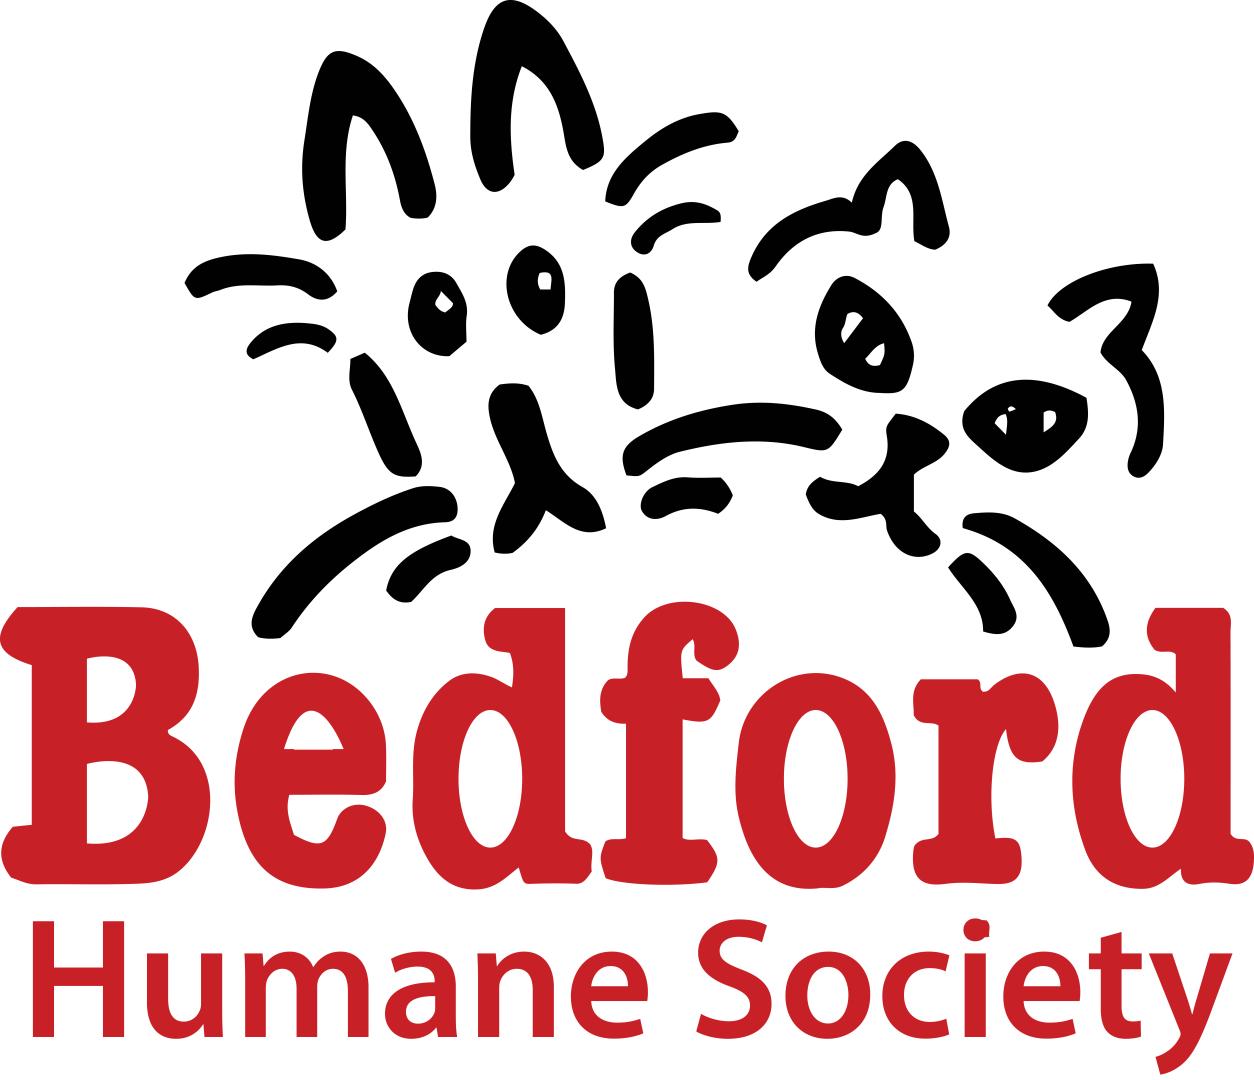 Elimination of pet overpopulation and suffering in the town and county of Bedford through education, spay/neuter programs, and pet adoptions.